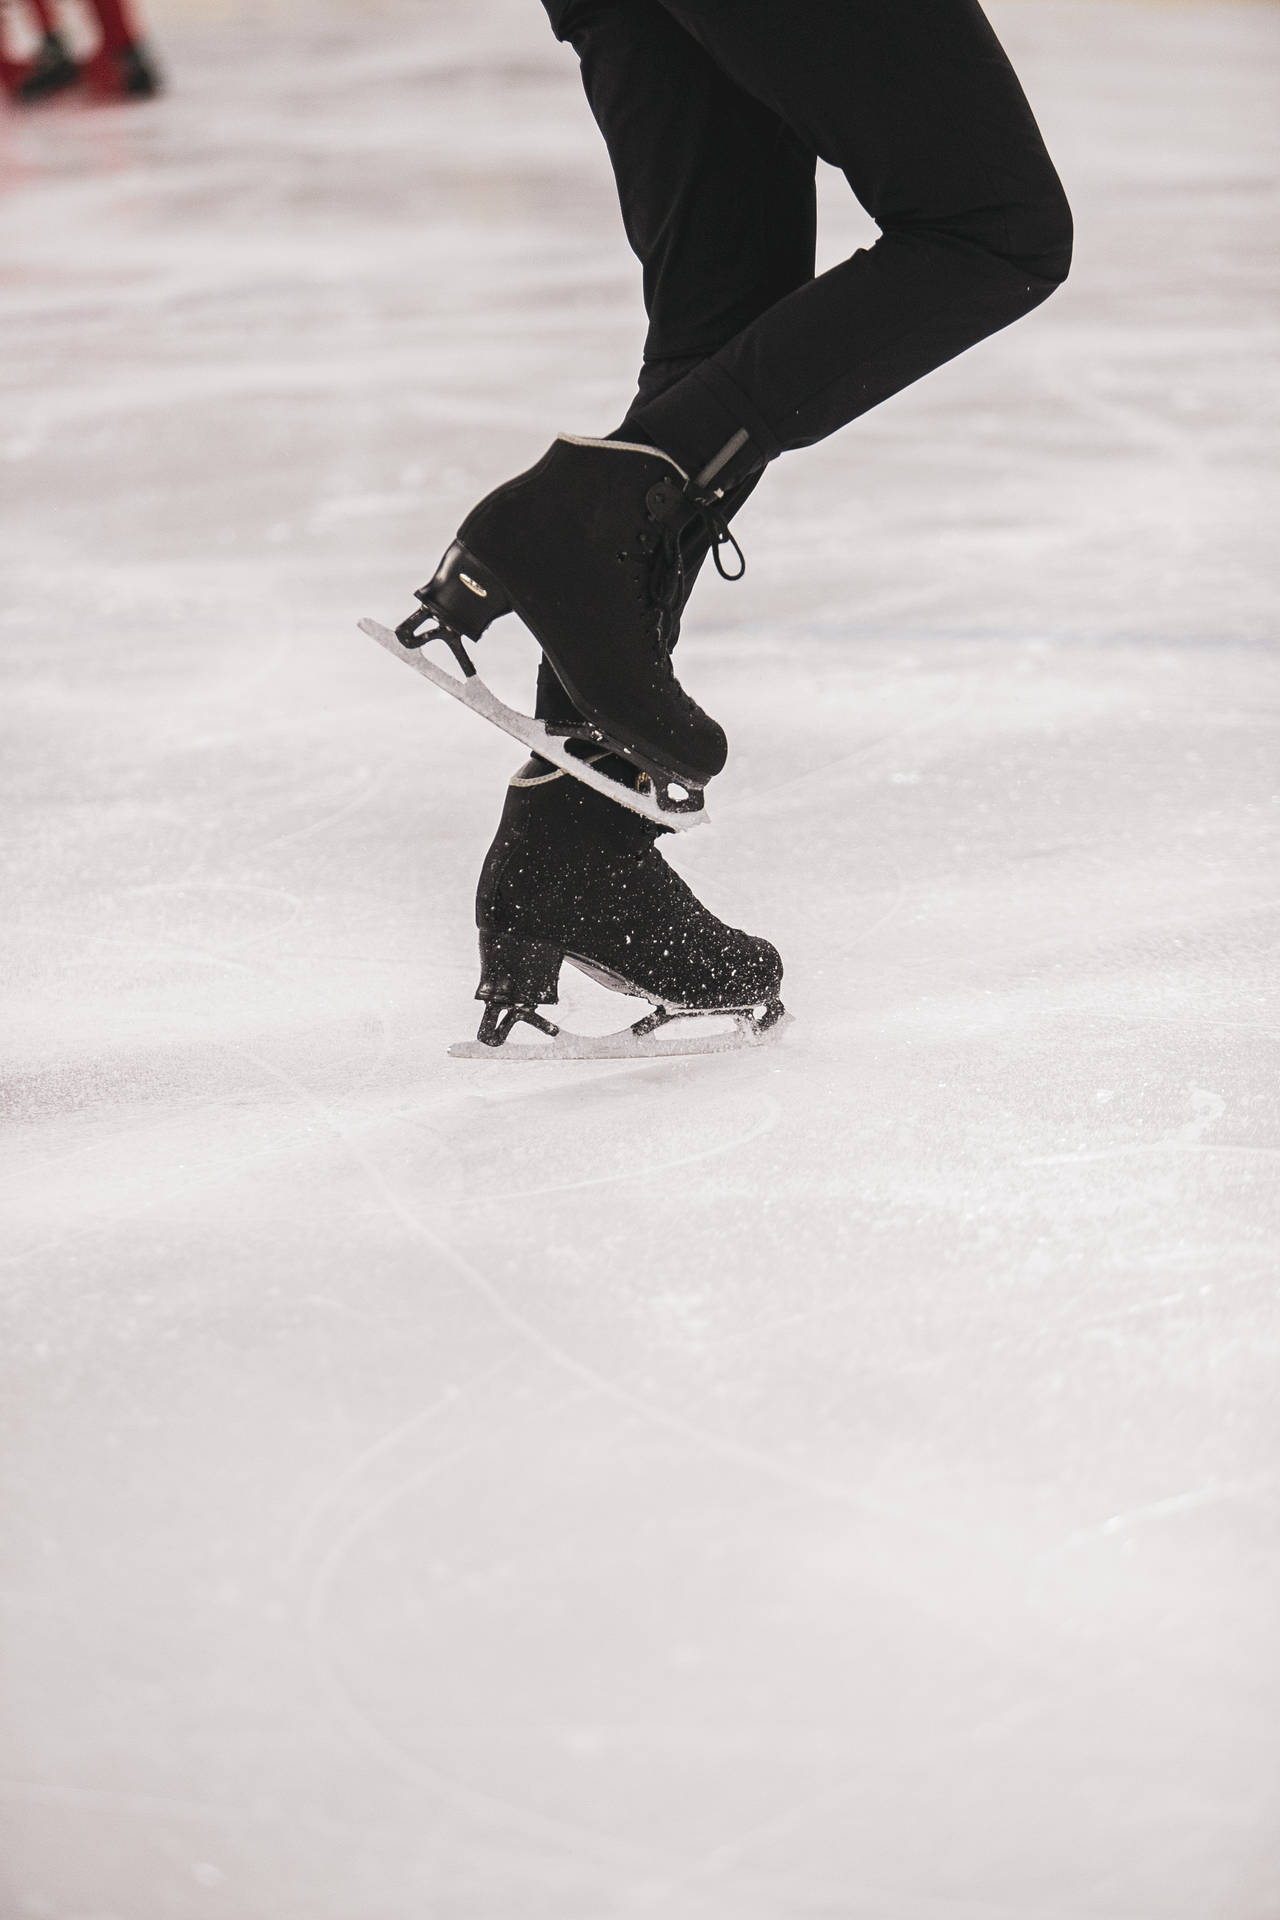 Hockey Wallpaper Discover more 1080p, background, Black, ice, iphone  wallpaper.